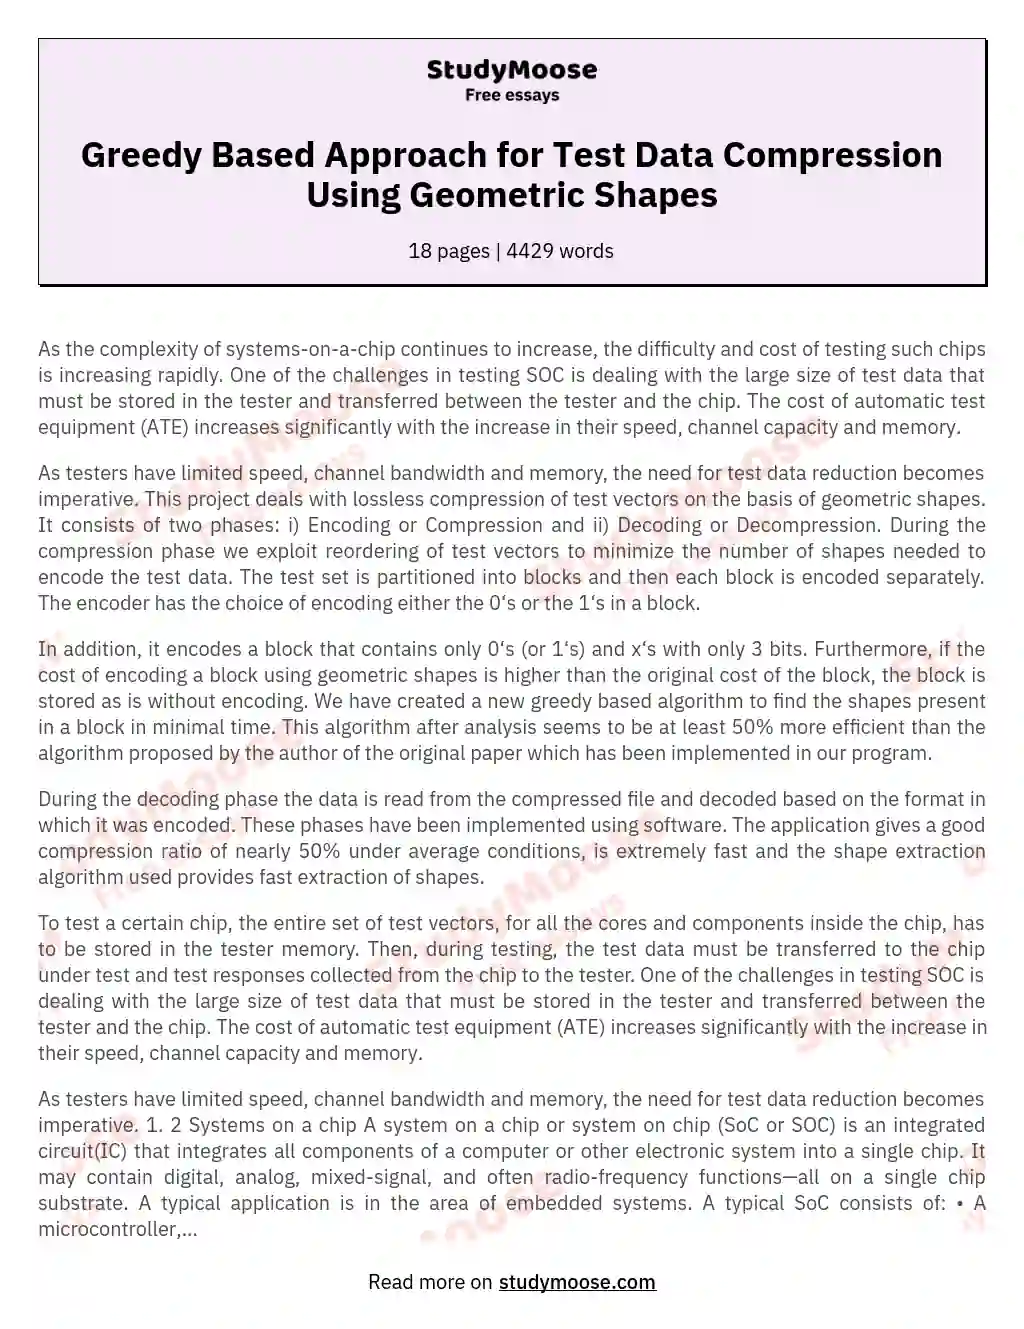 Greedy Based Approach for Test Data Compression Using Geometric Shapes essay